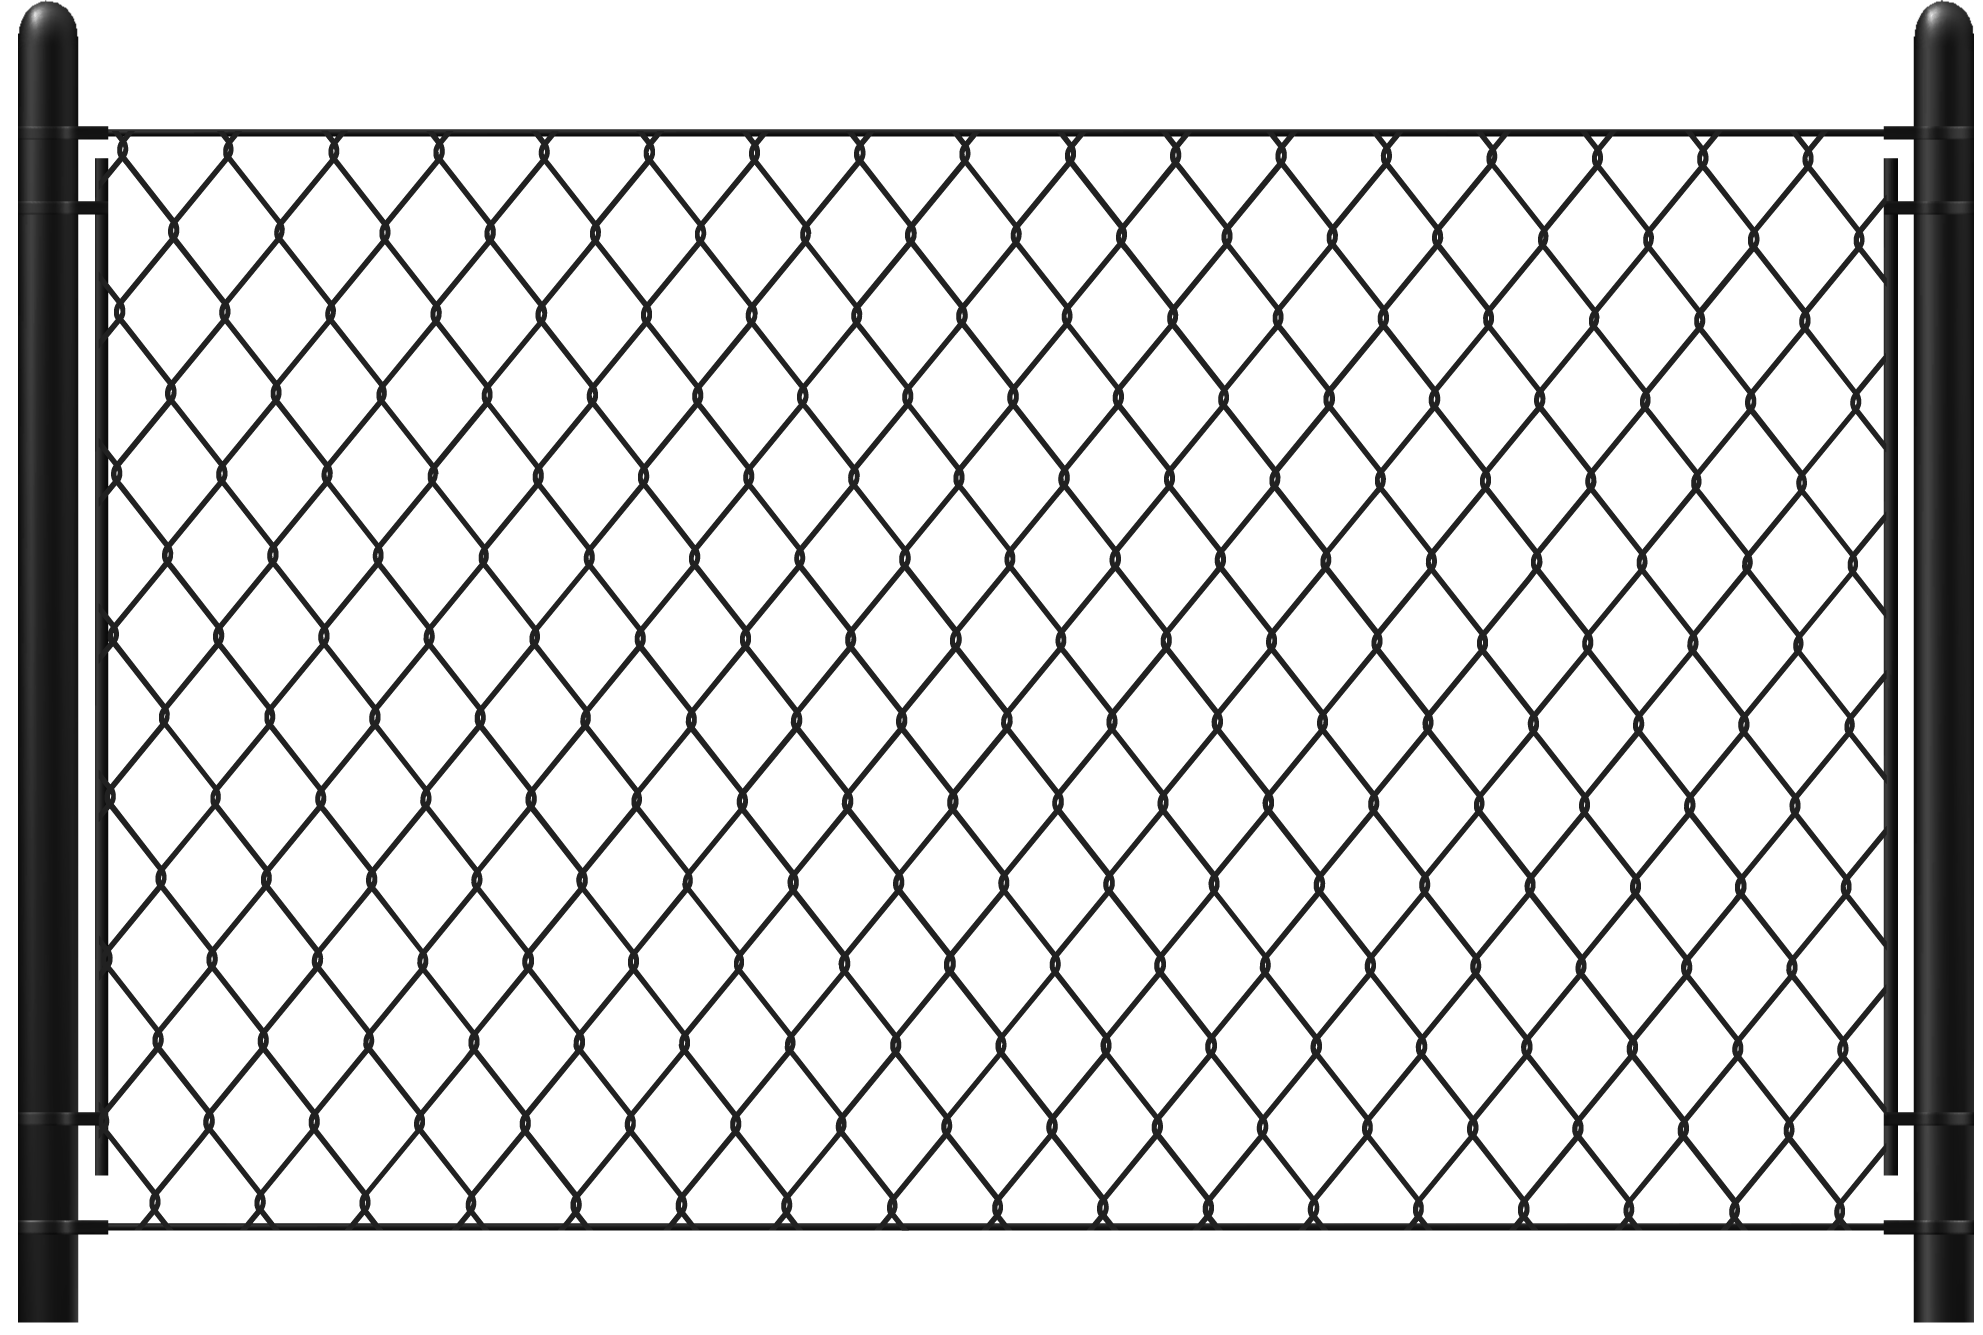 Rendering of a Colored Vinyl Coated Chain Link Fence from Fence Supply Company Serving Southwest Florida, Central Florida, & South Florida